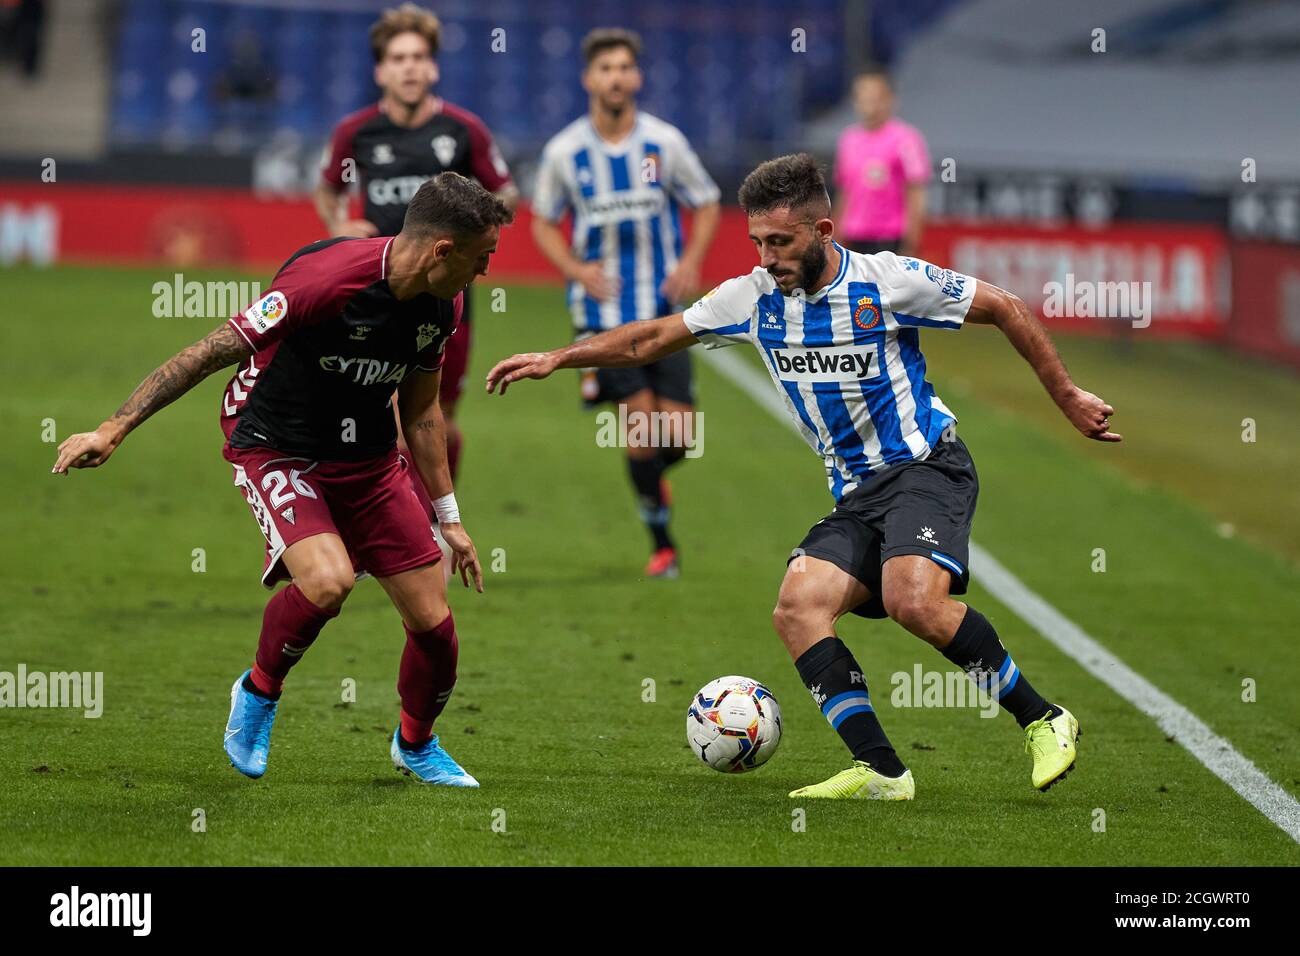 Barcelona, Spain. 12th Sep, 2020. Matias Vargas of RCD Espanyol in action with Carlos Munoz of Albacete Balompie during the Liga SmartBank match between RCD Espanyol and vs Albacete Balompie at RCD Stadium on September 12, 2020 in Barcelona, Spain. Credit: Dax Images/Alamy Live News Stock Photo